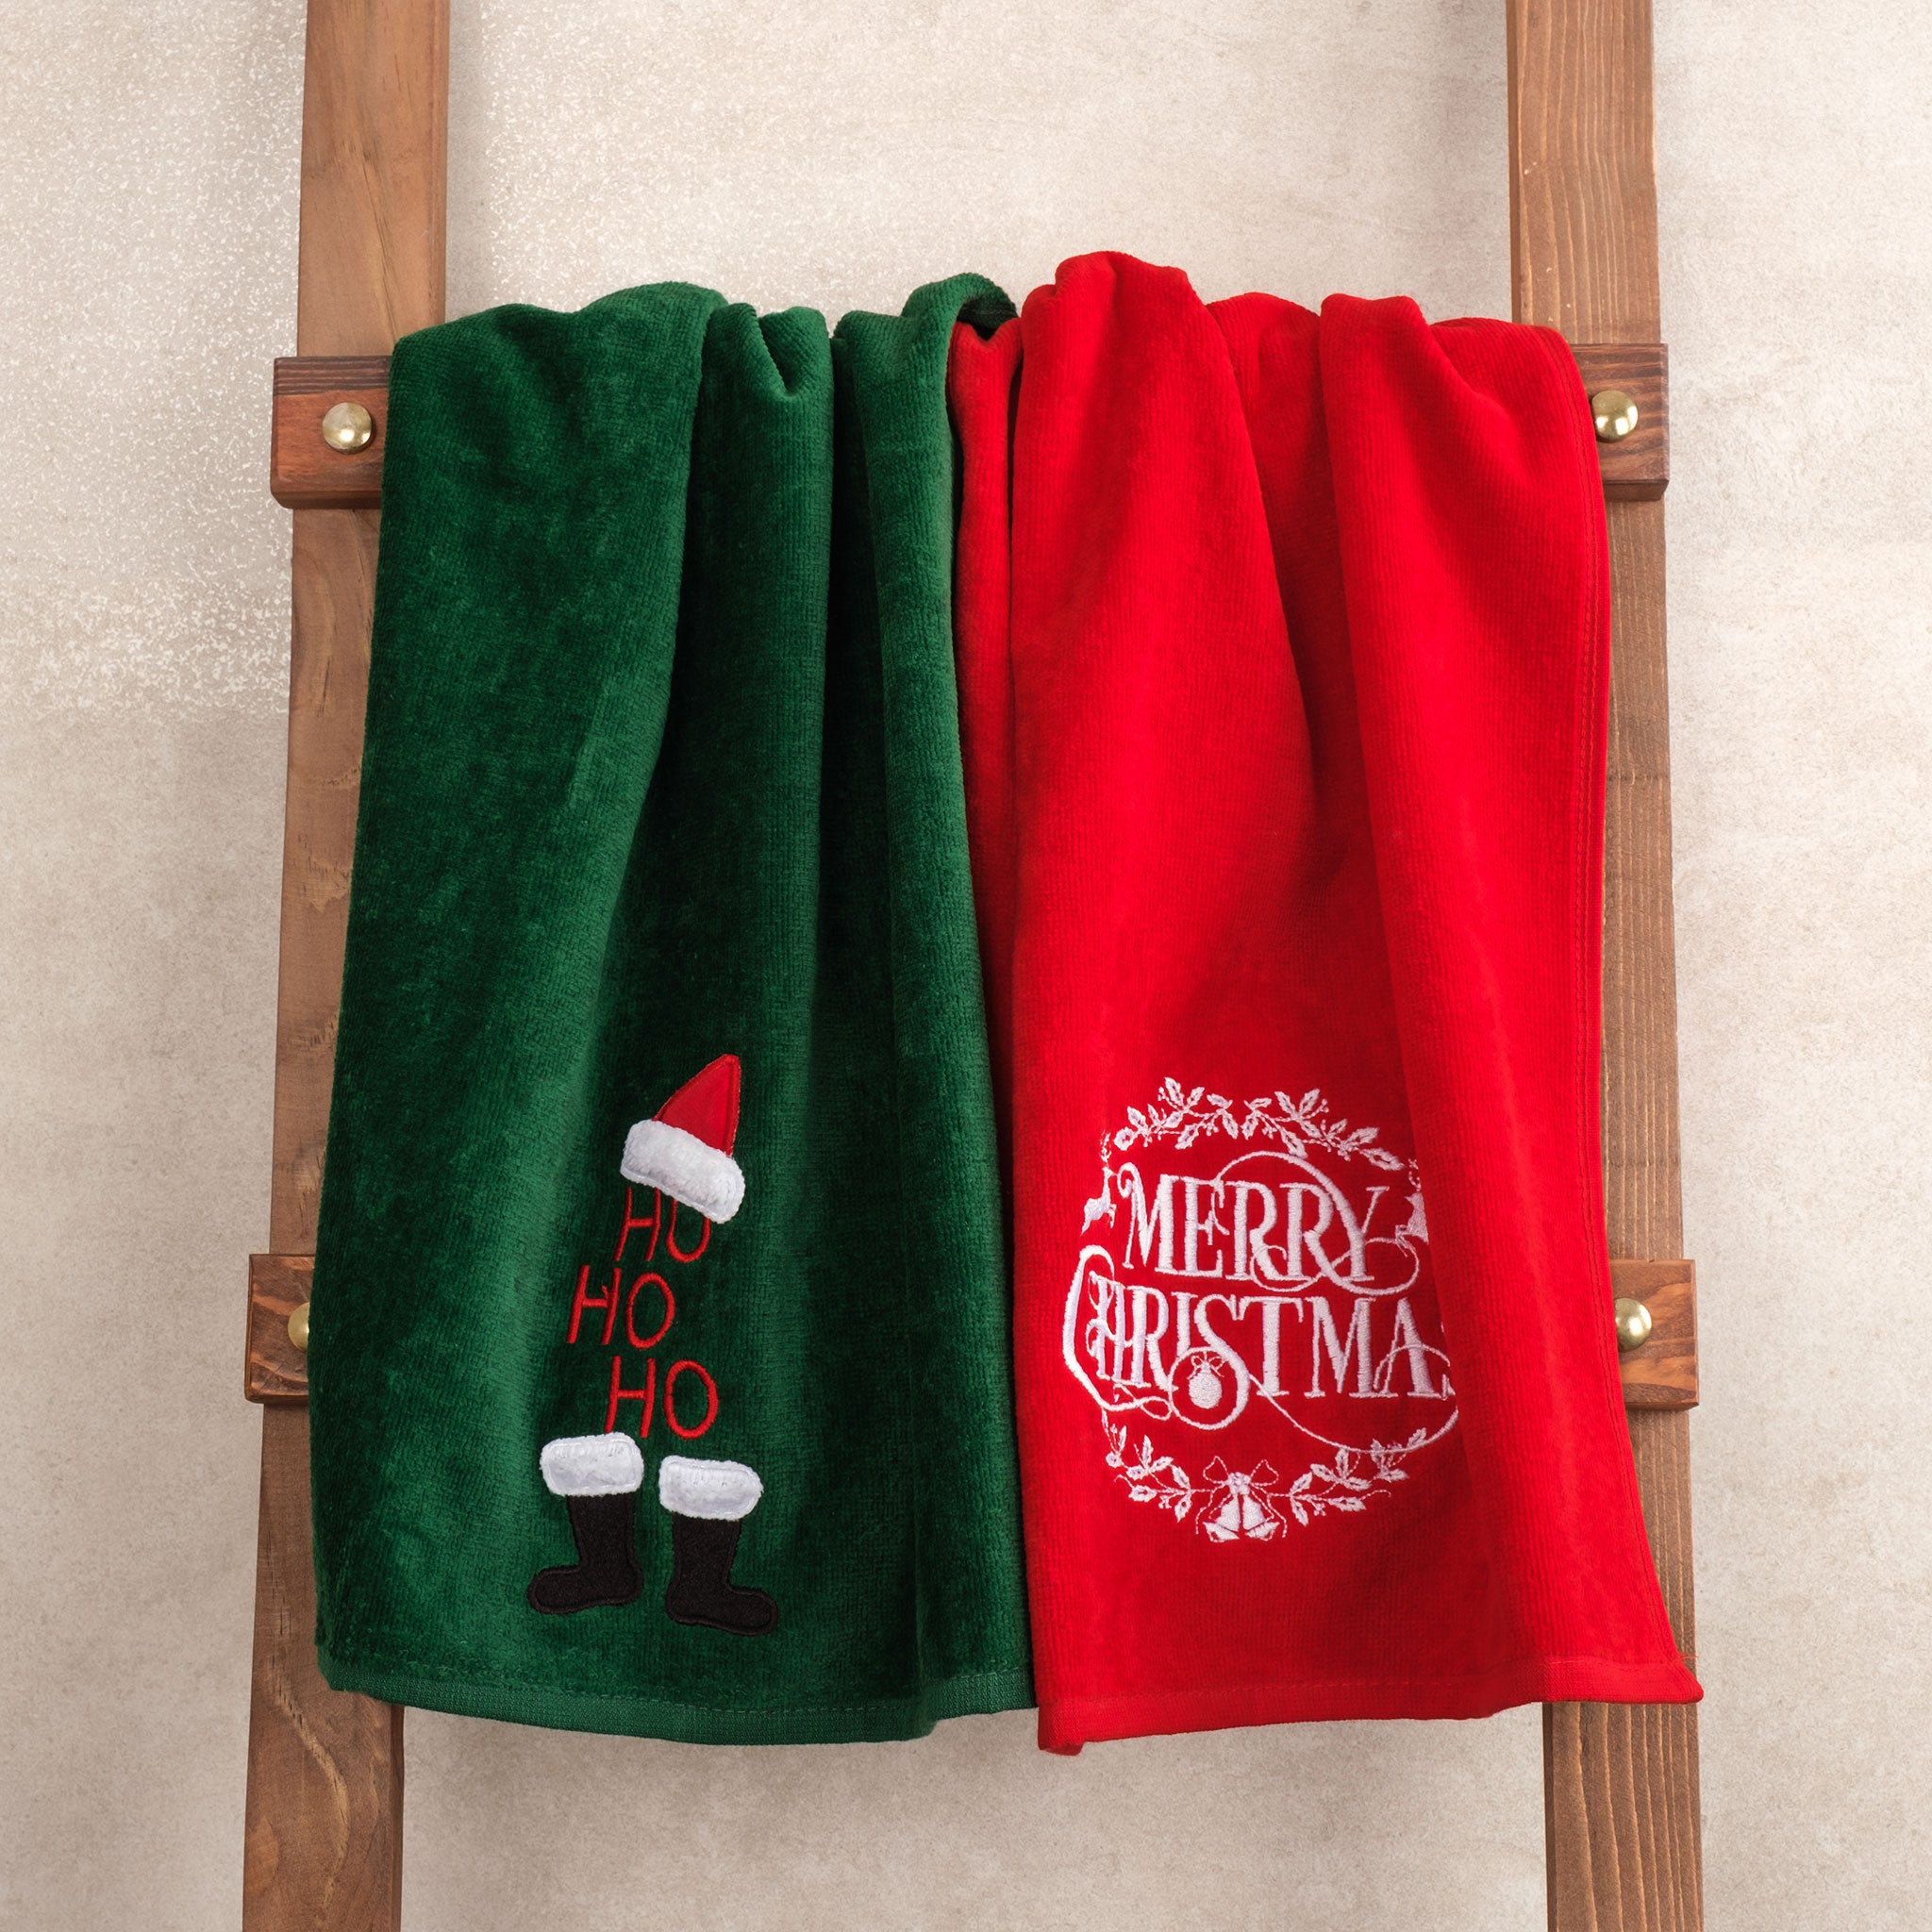 American Soft Linen - Christmas Towels 2  Packed Embroidered Towels for Decor Xmas - 60 Set Case Pack - Merry-Hoho - 1